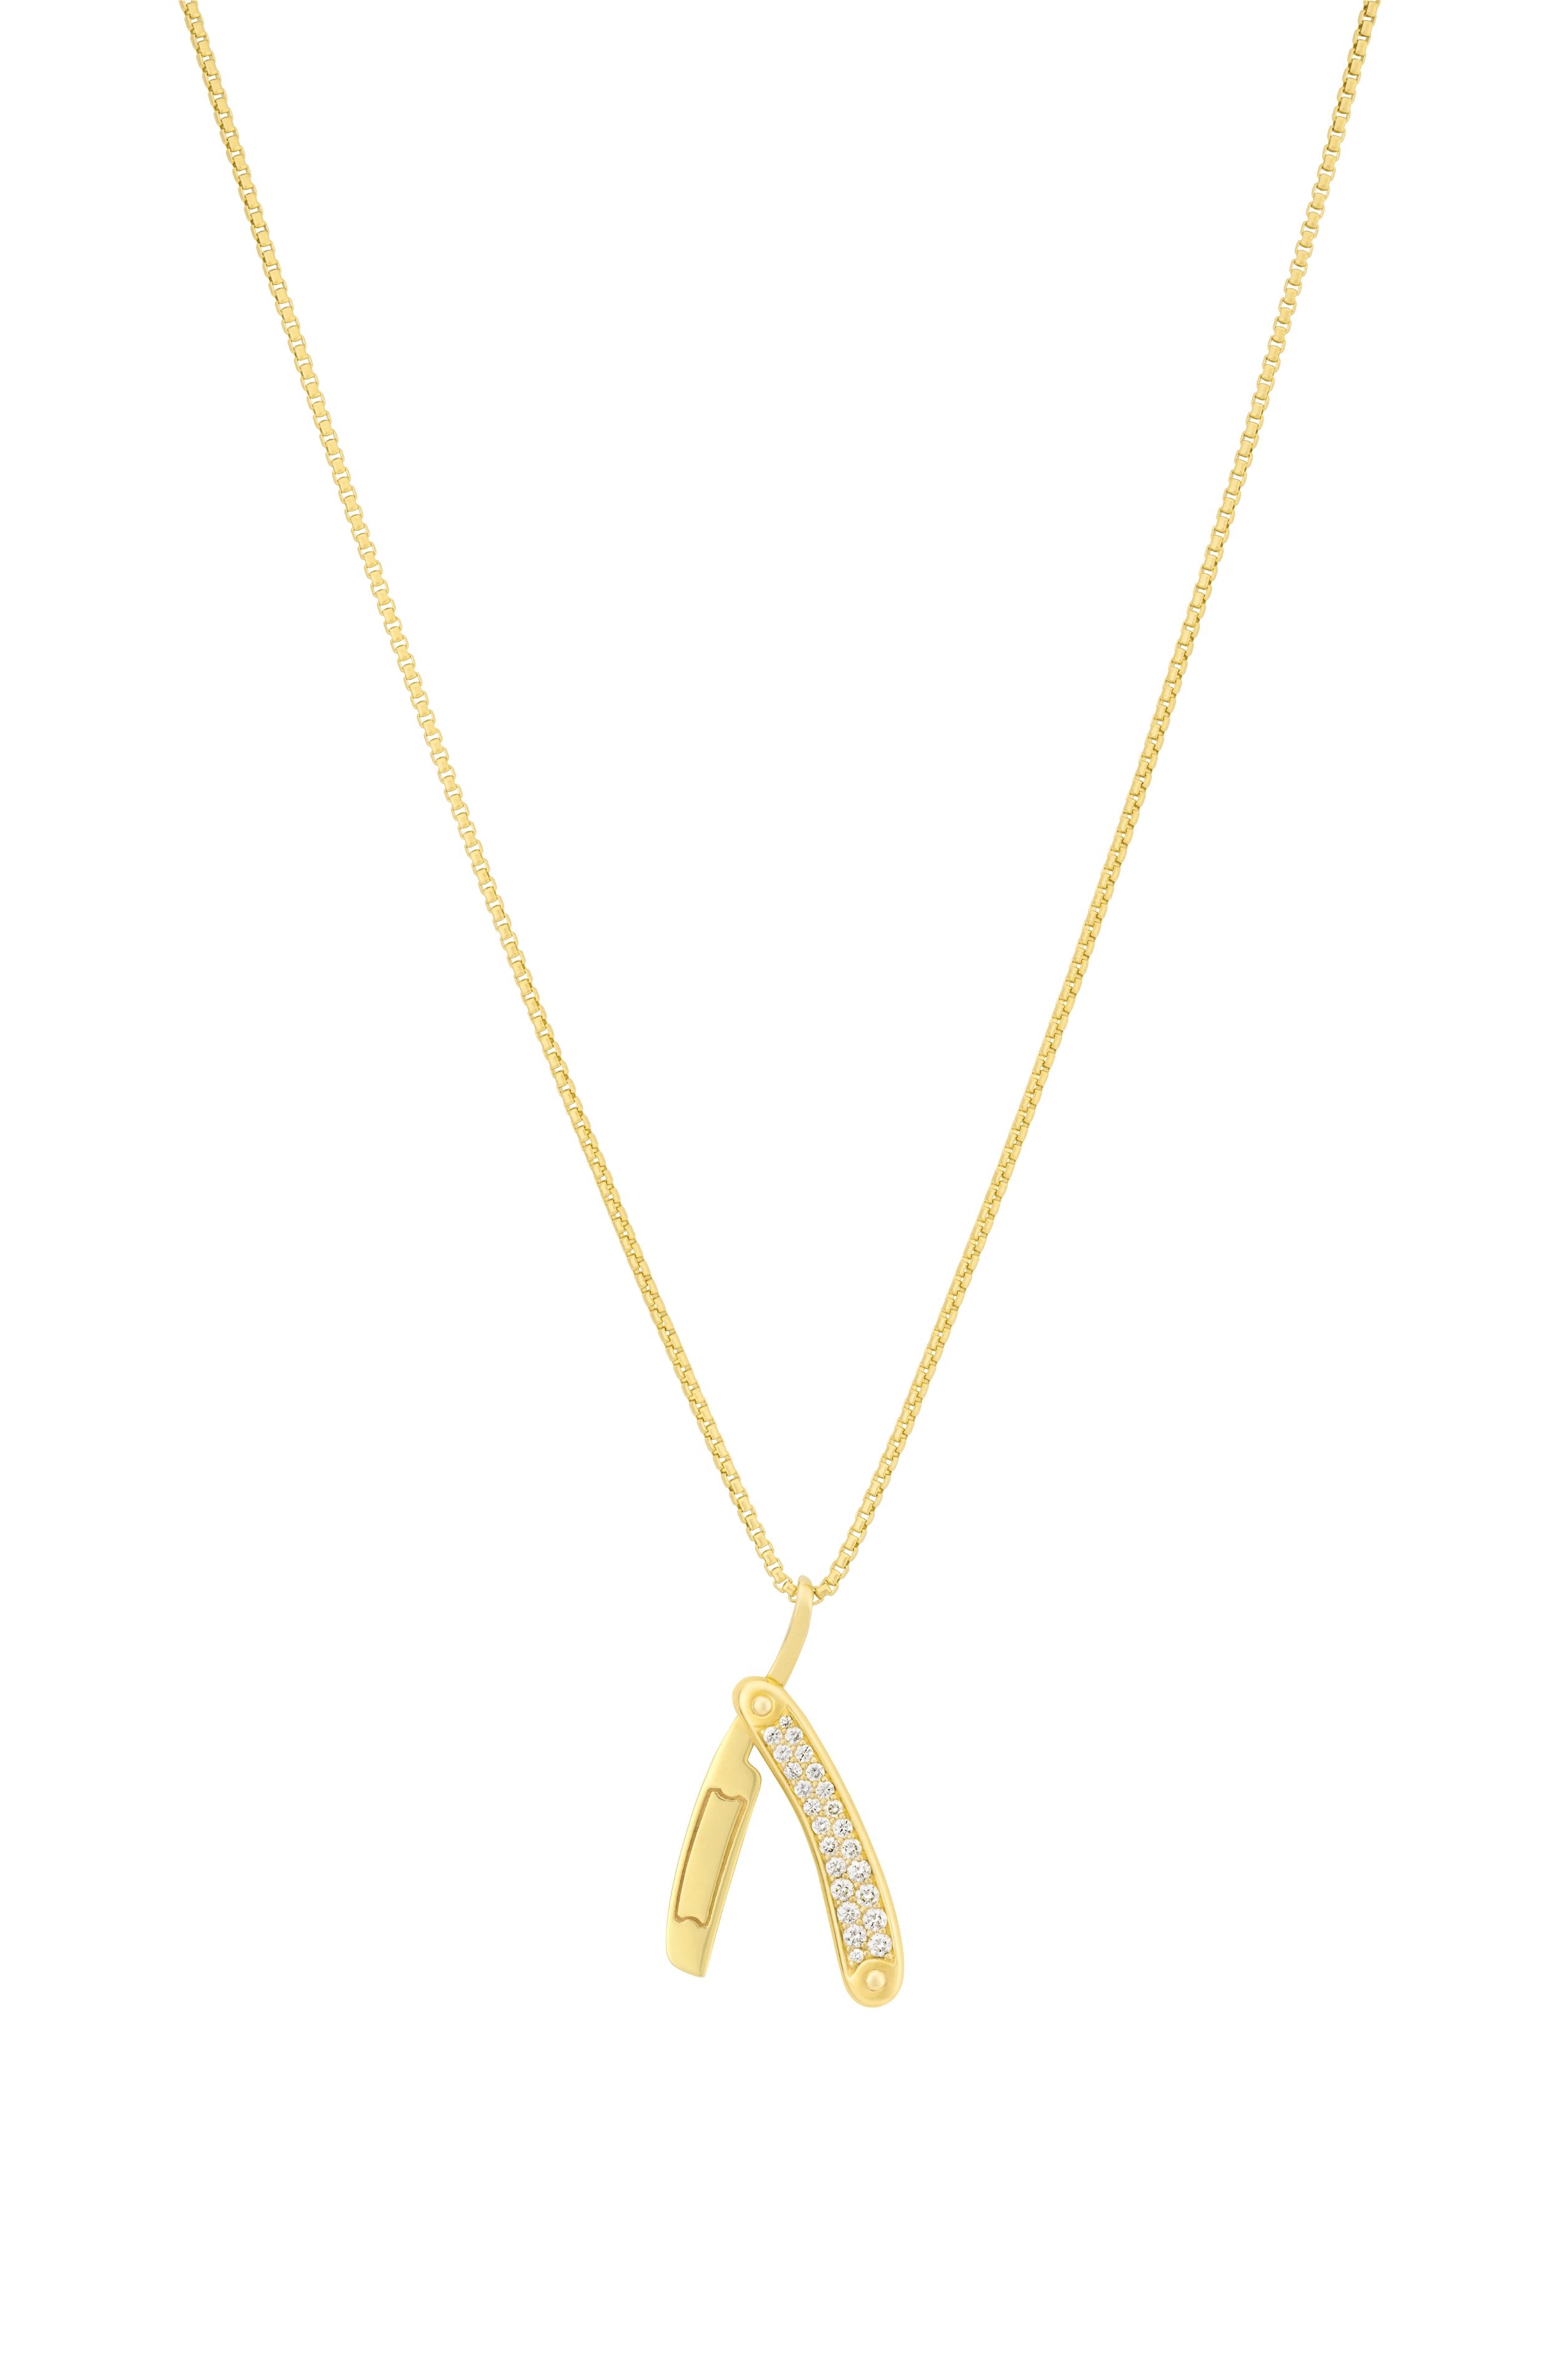 England Made Me Switchblade Pendant Necklace with White Diamonds in 18kt Yellow Gold - 30"